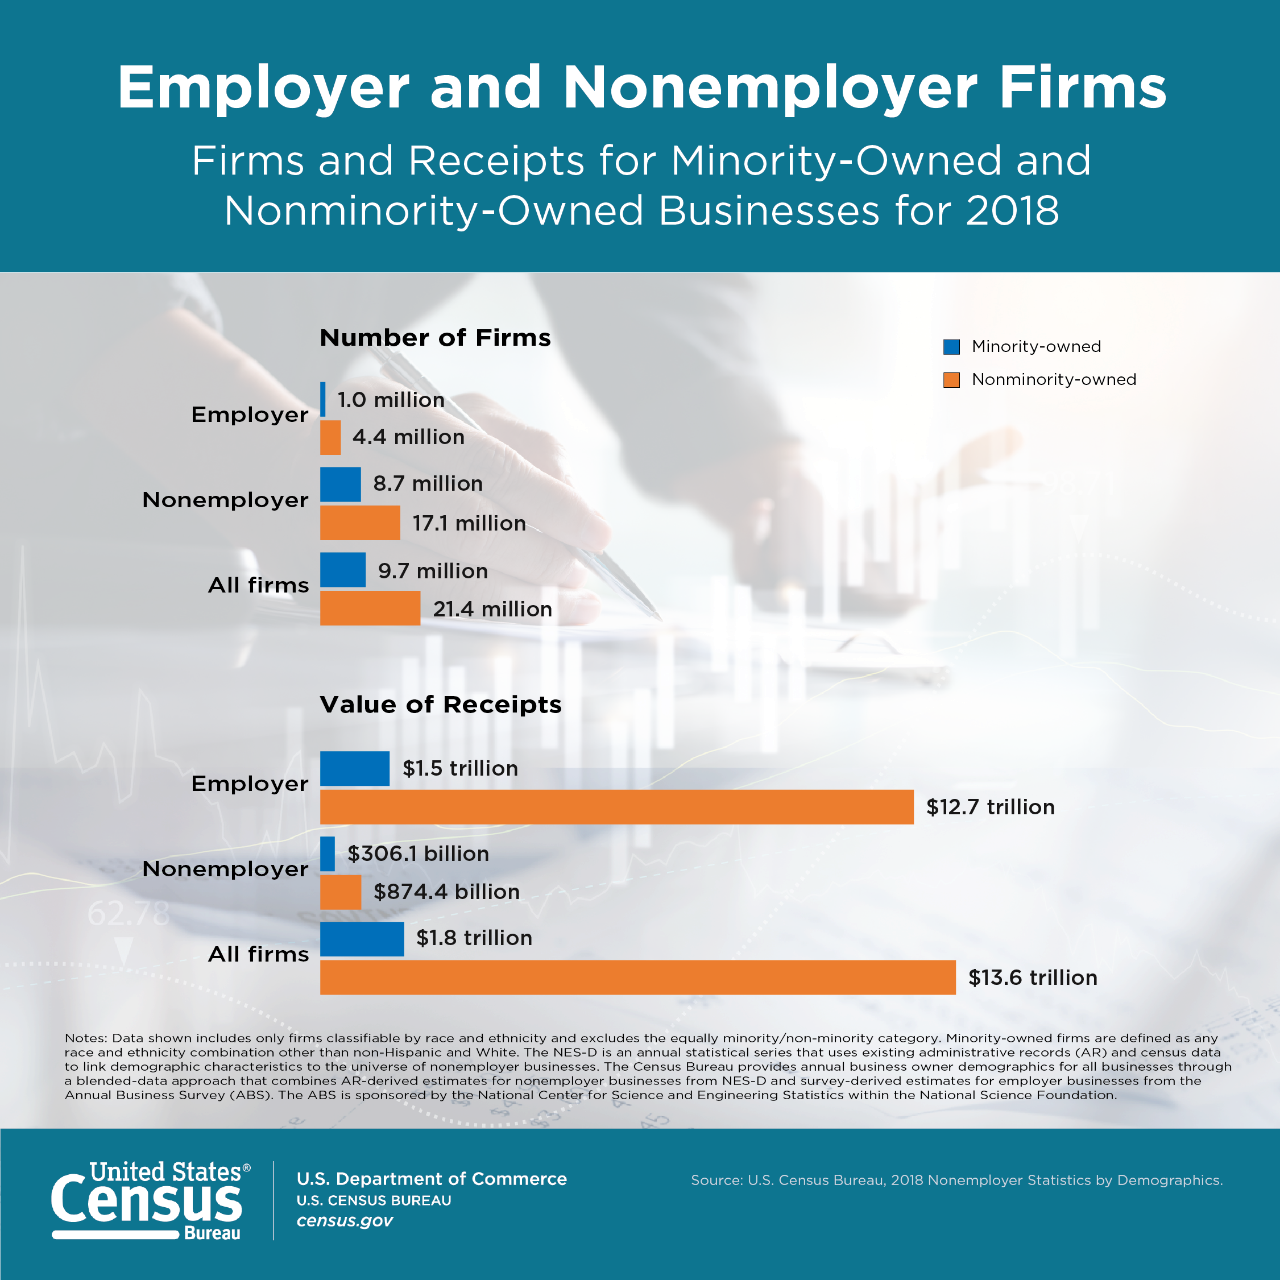 Employer and Nonemployer Firms